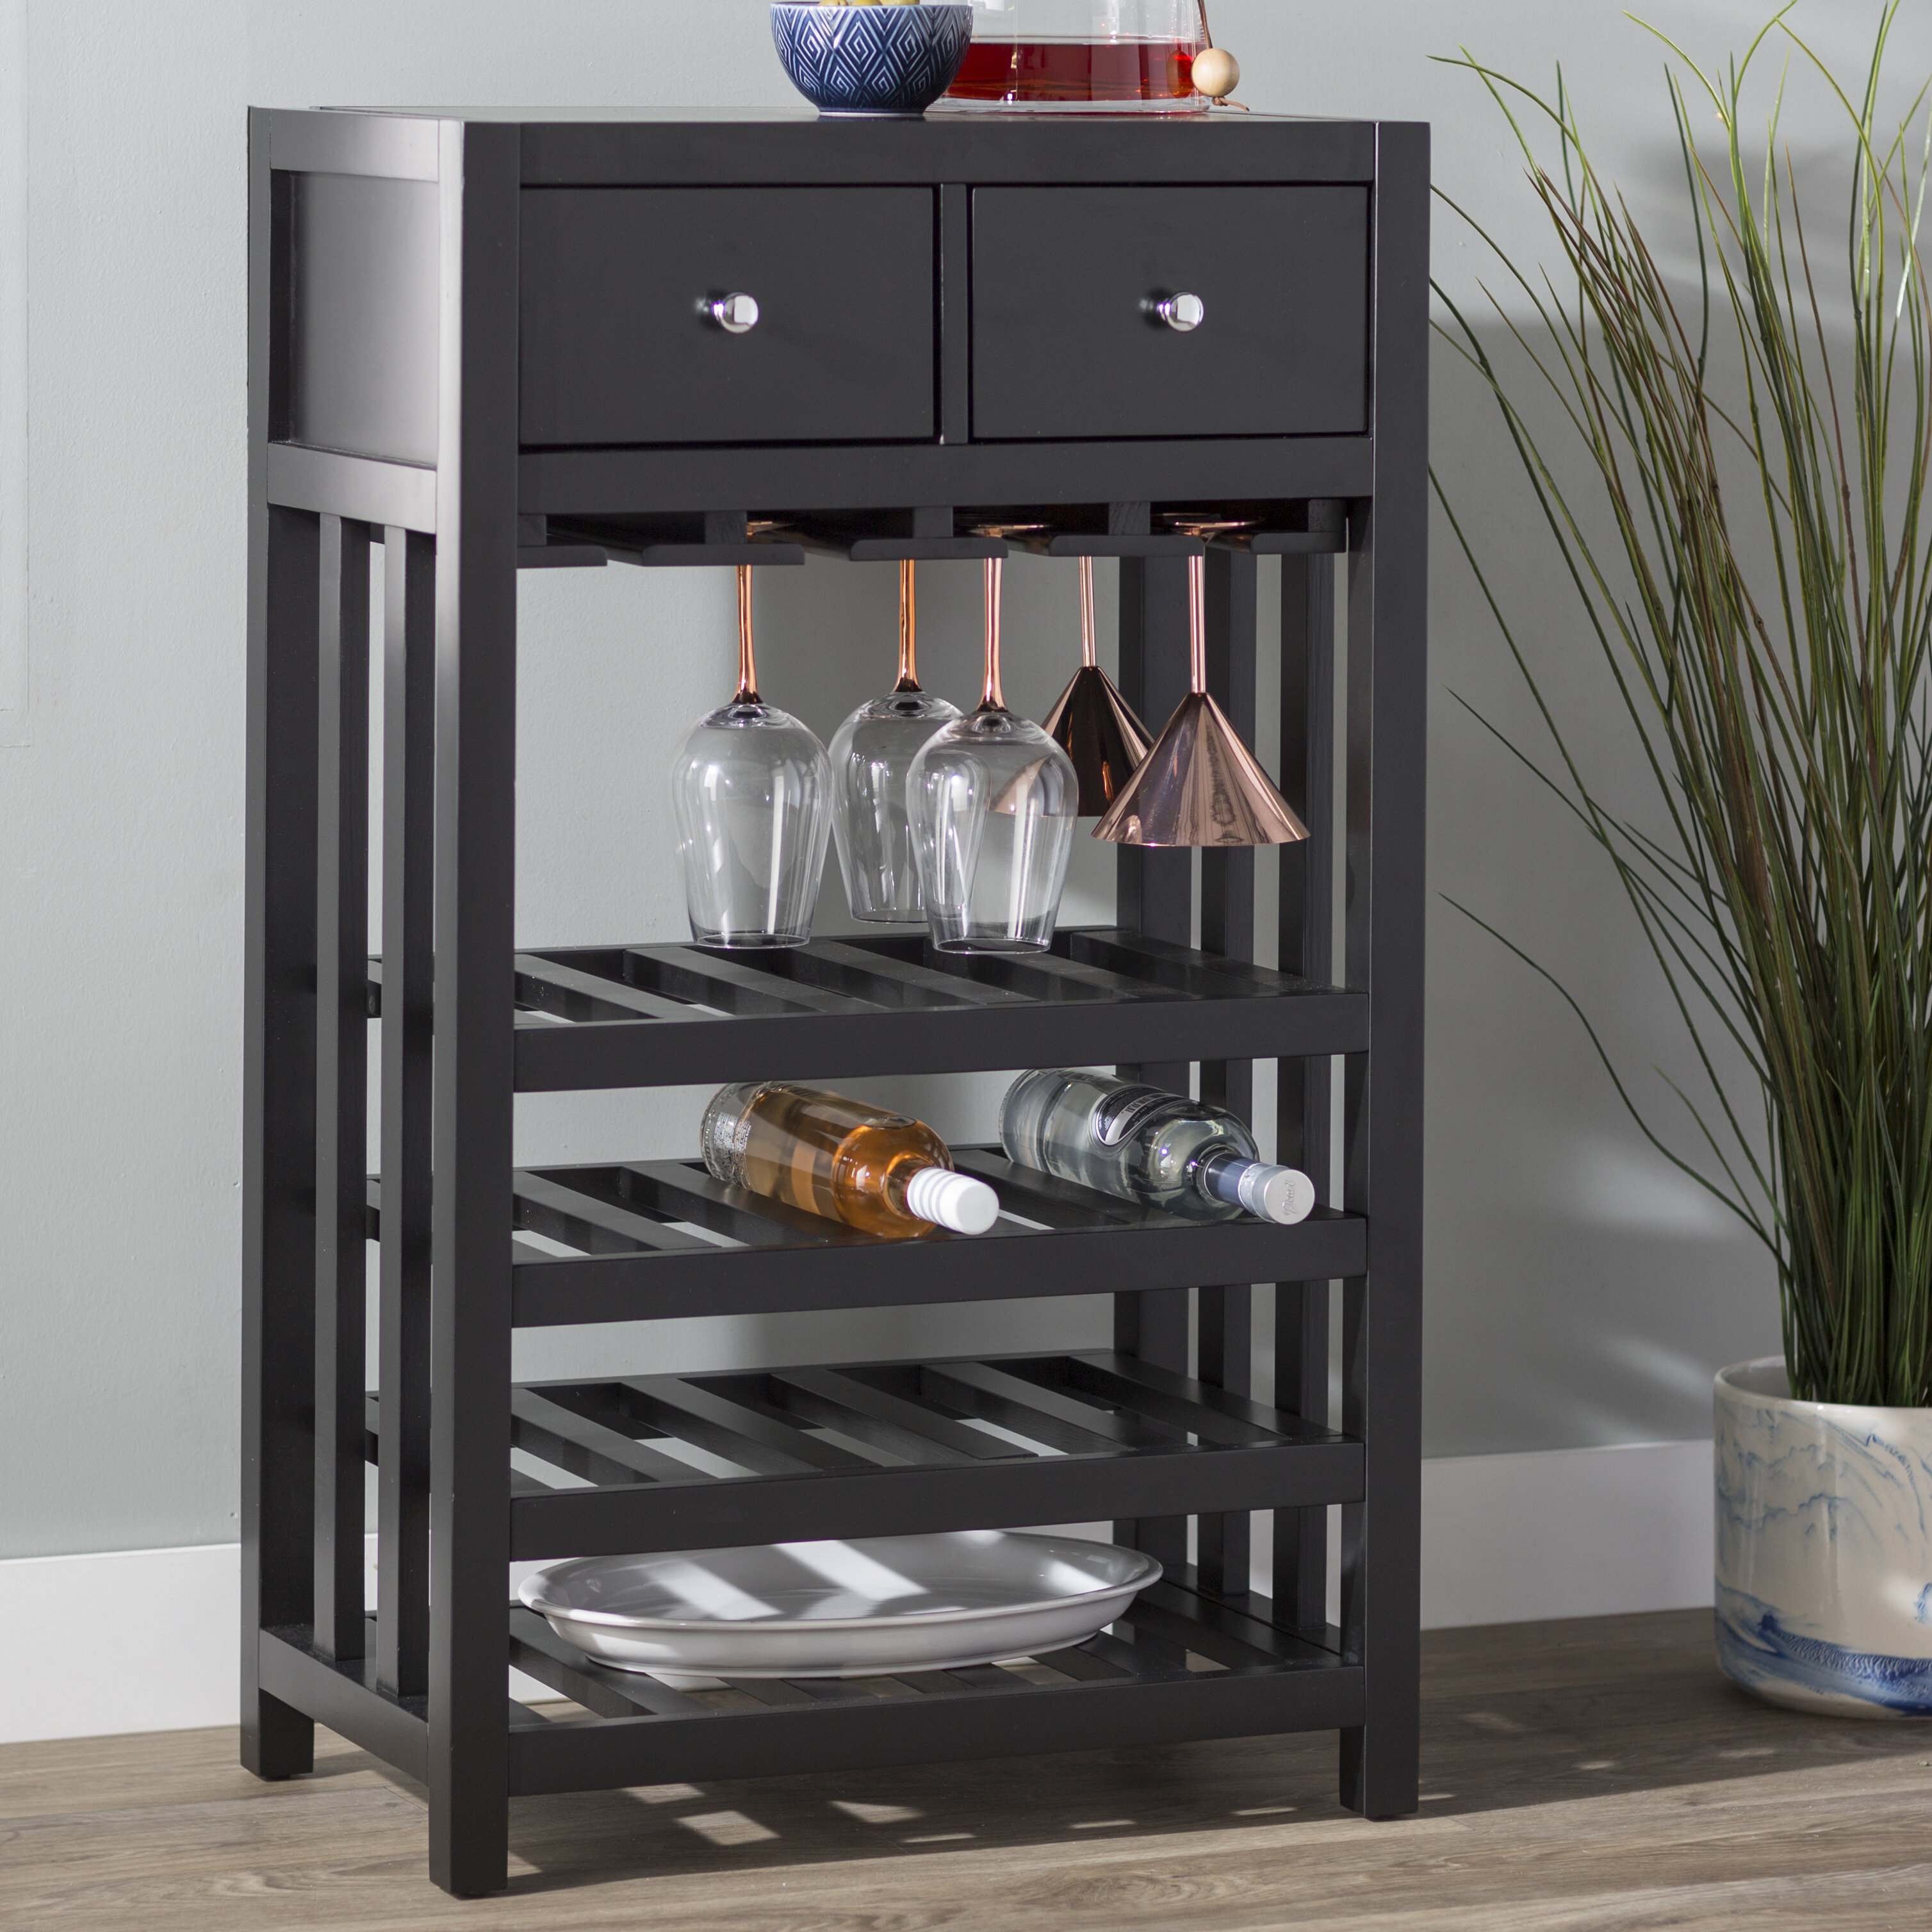 Andover Mills Humphries Tower Bar With Wine Storage Reviews